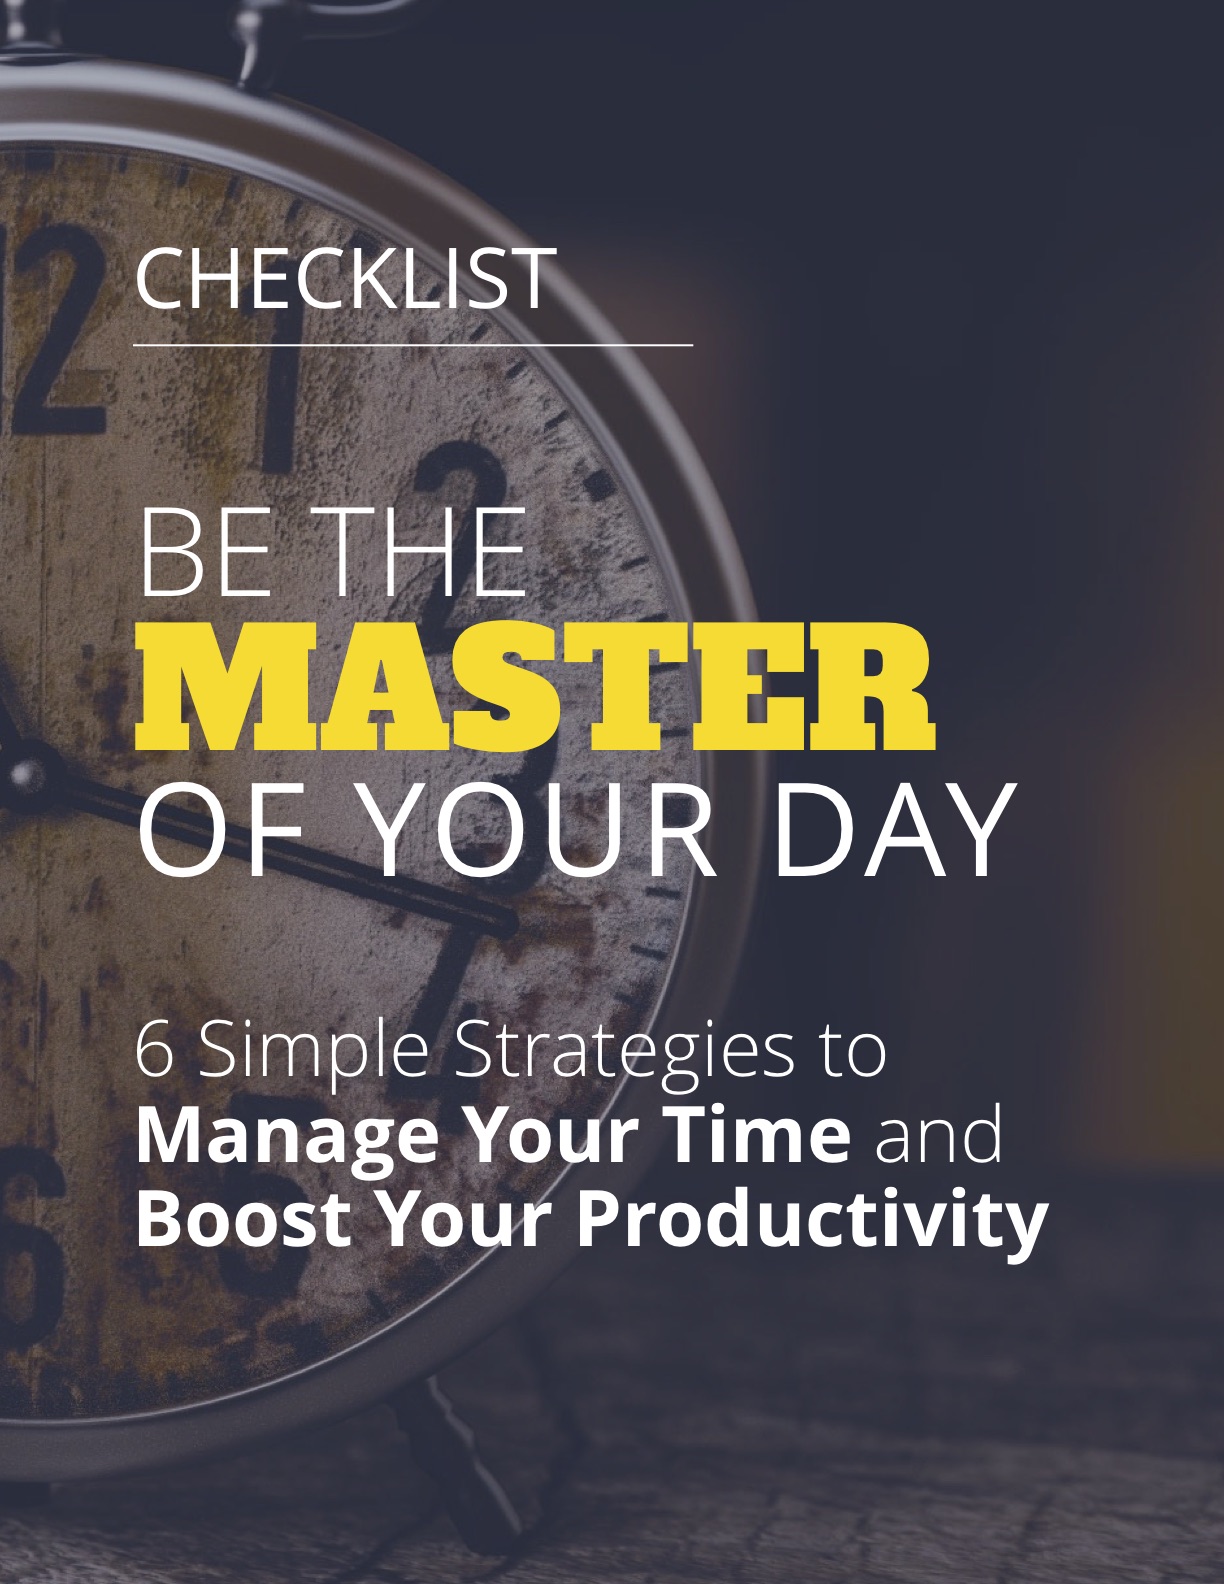 Mastering your time